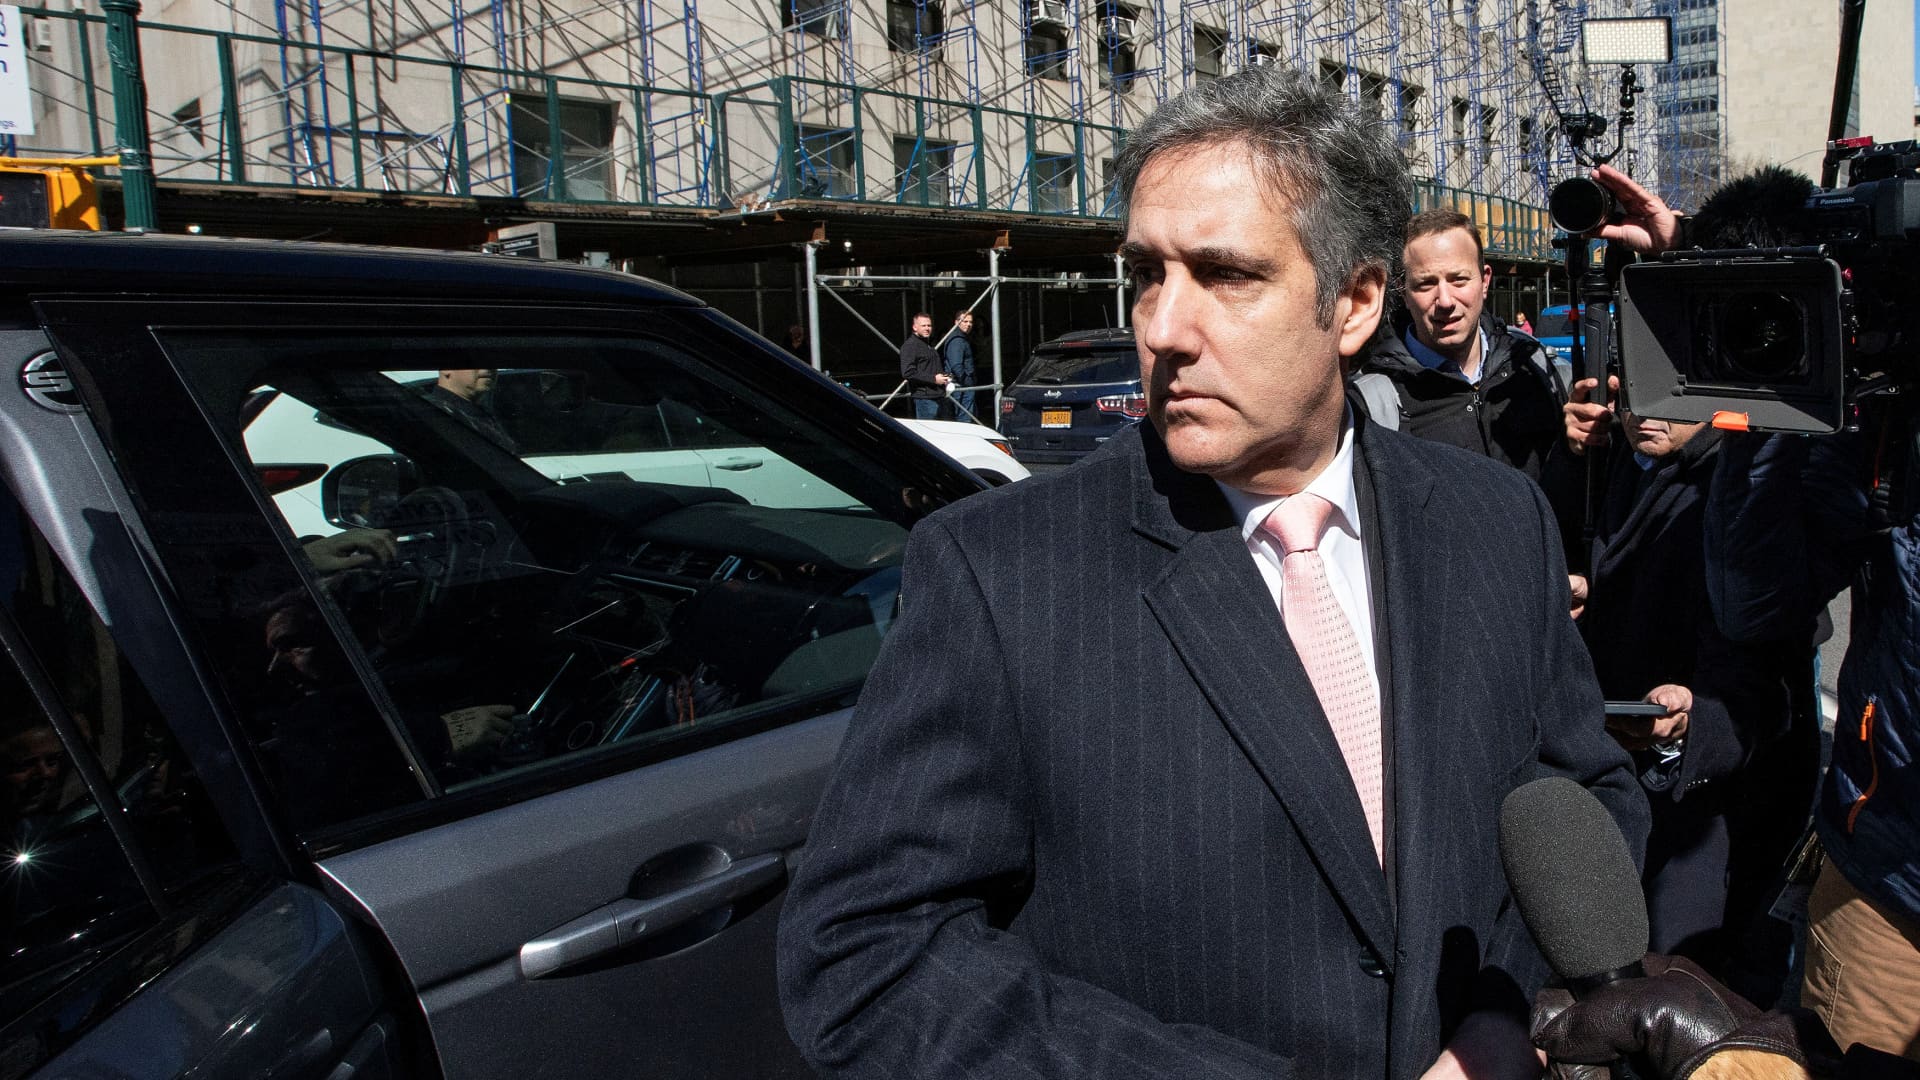 Michael Cohen, former attorney for former U.S. President Donald Trump, arrives to the New York Courthouse in New York City, March 15, 2023.